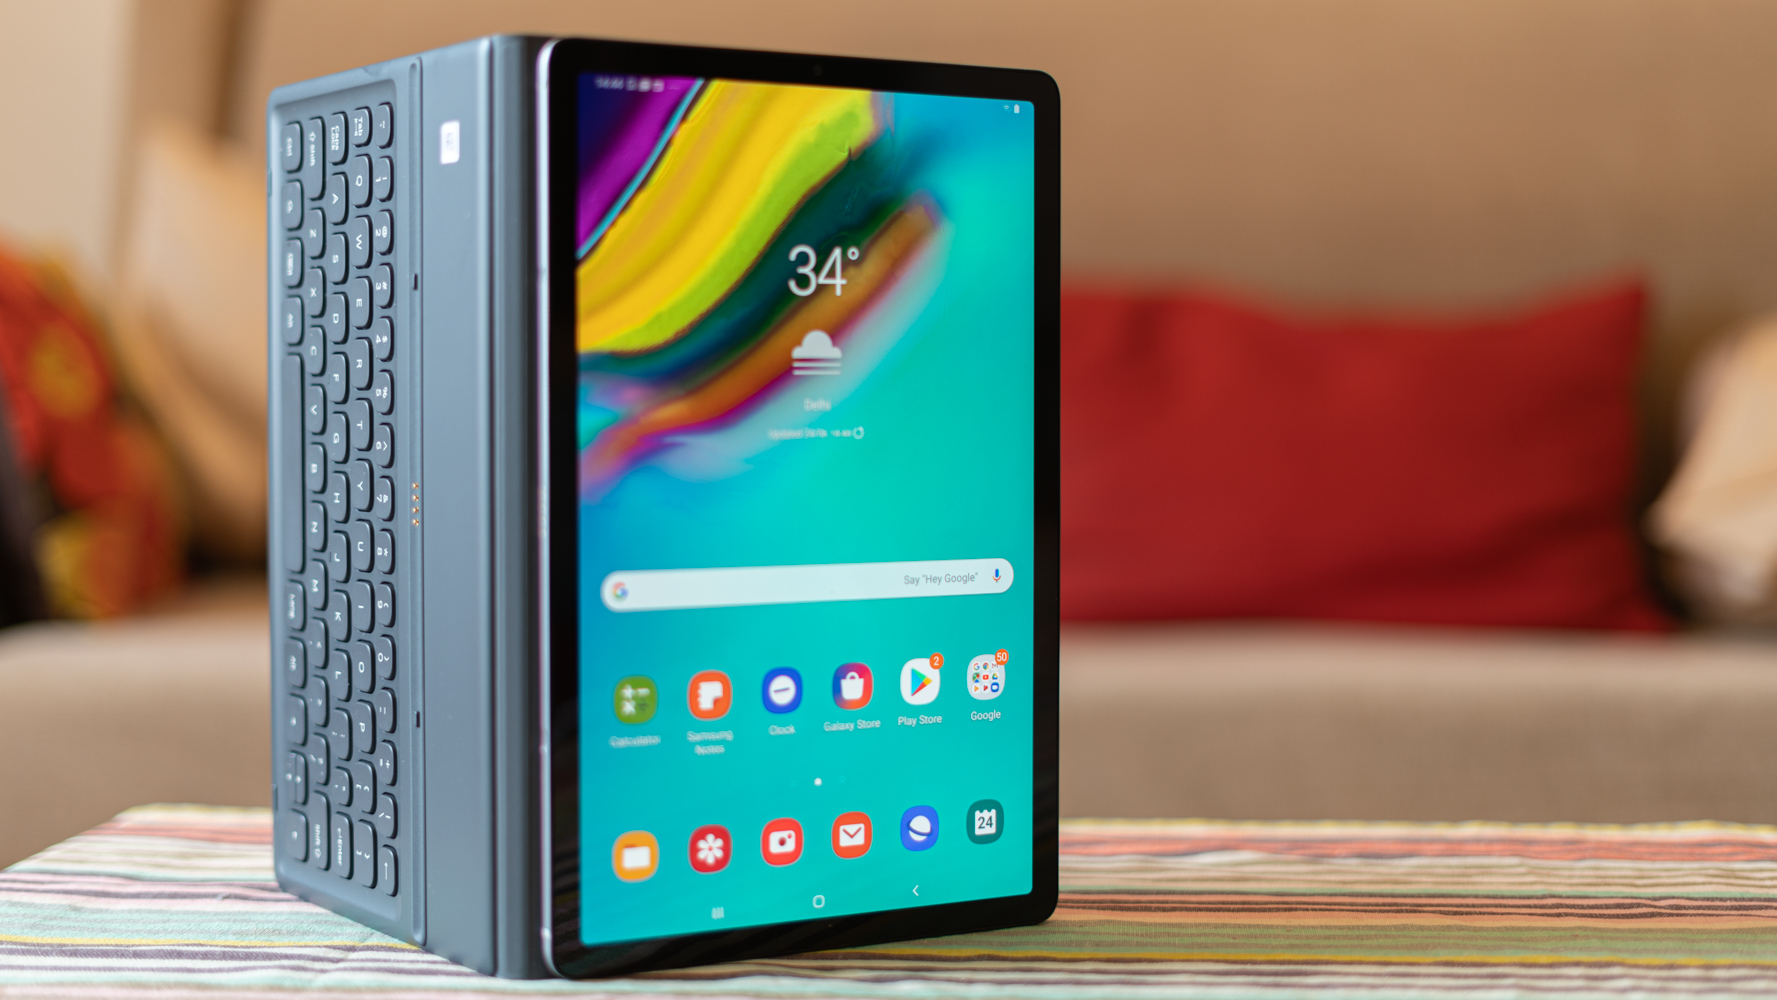 Samsung Galaxy Tab S5e hands-on: The best Android tablet around?